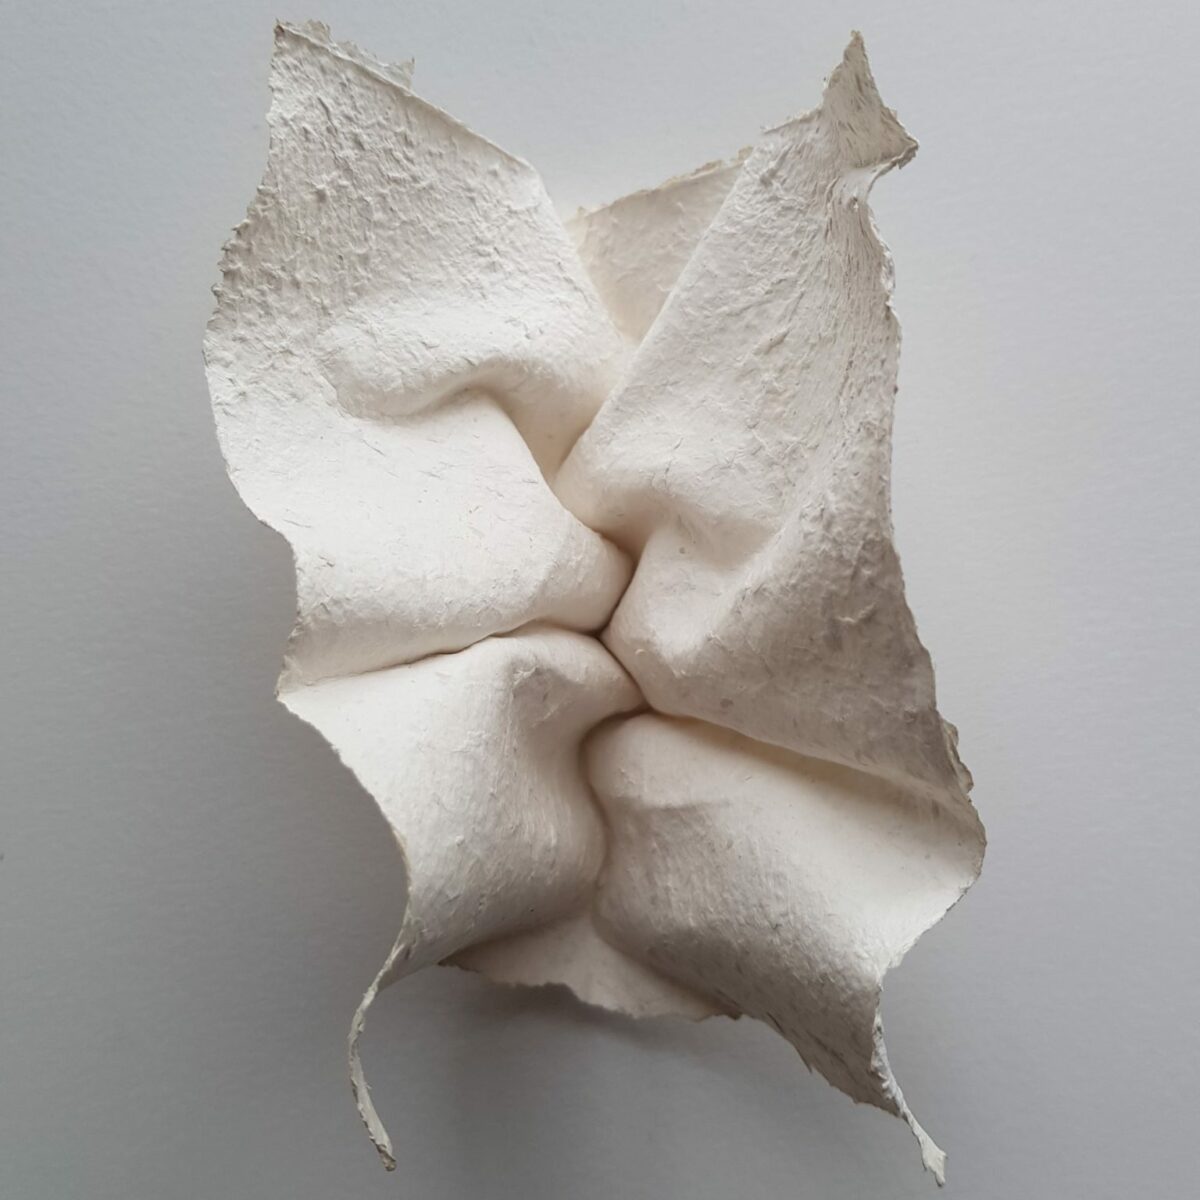 Fascinating Facial Sculptures Made From Folded Paper Sheets By Polly Verity (13)